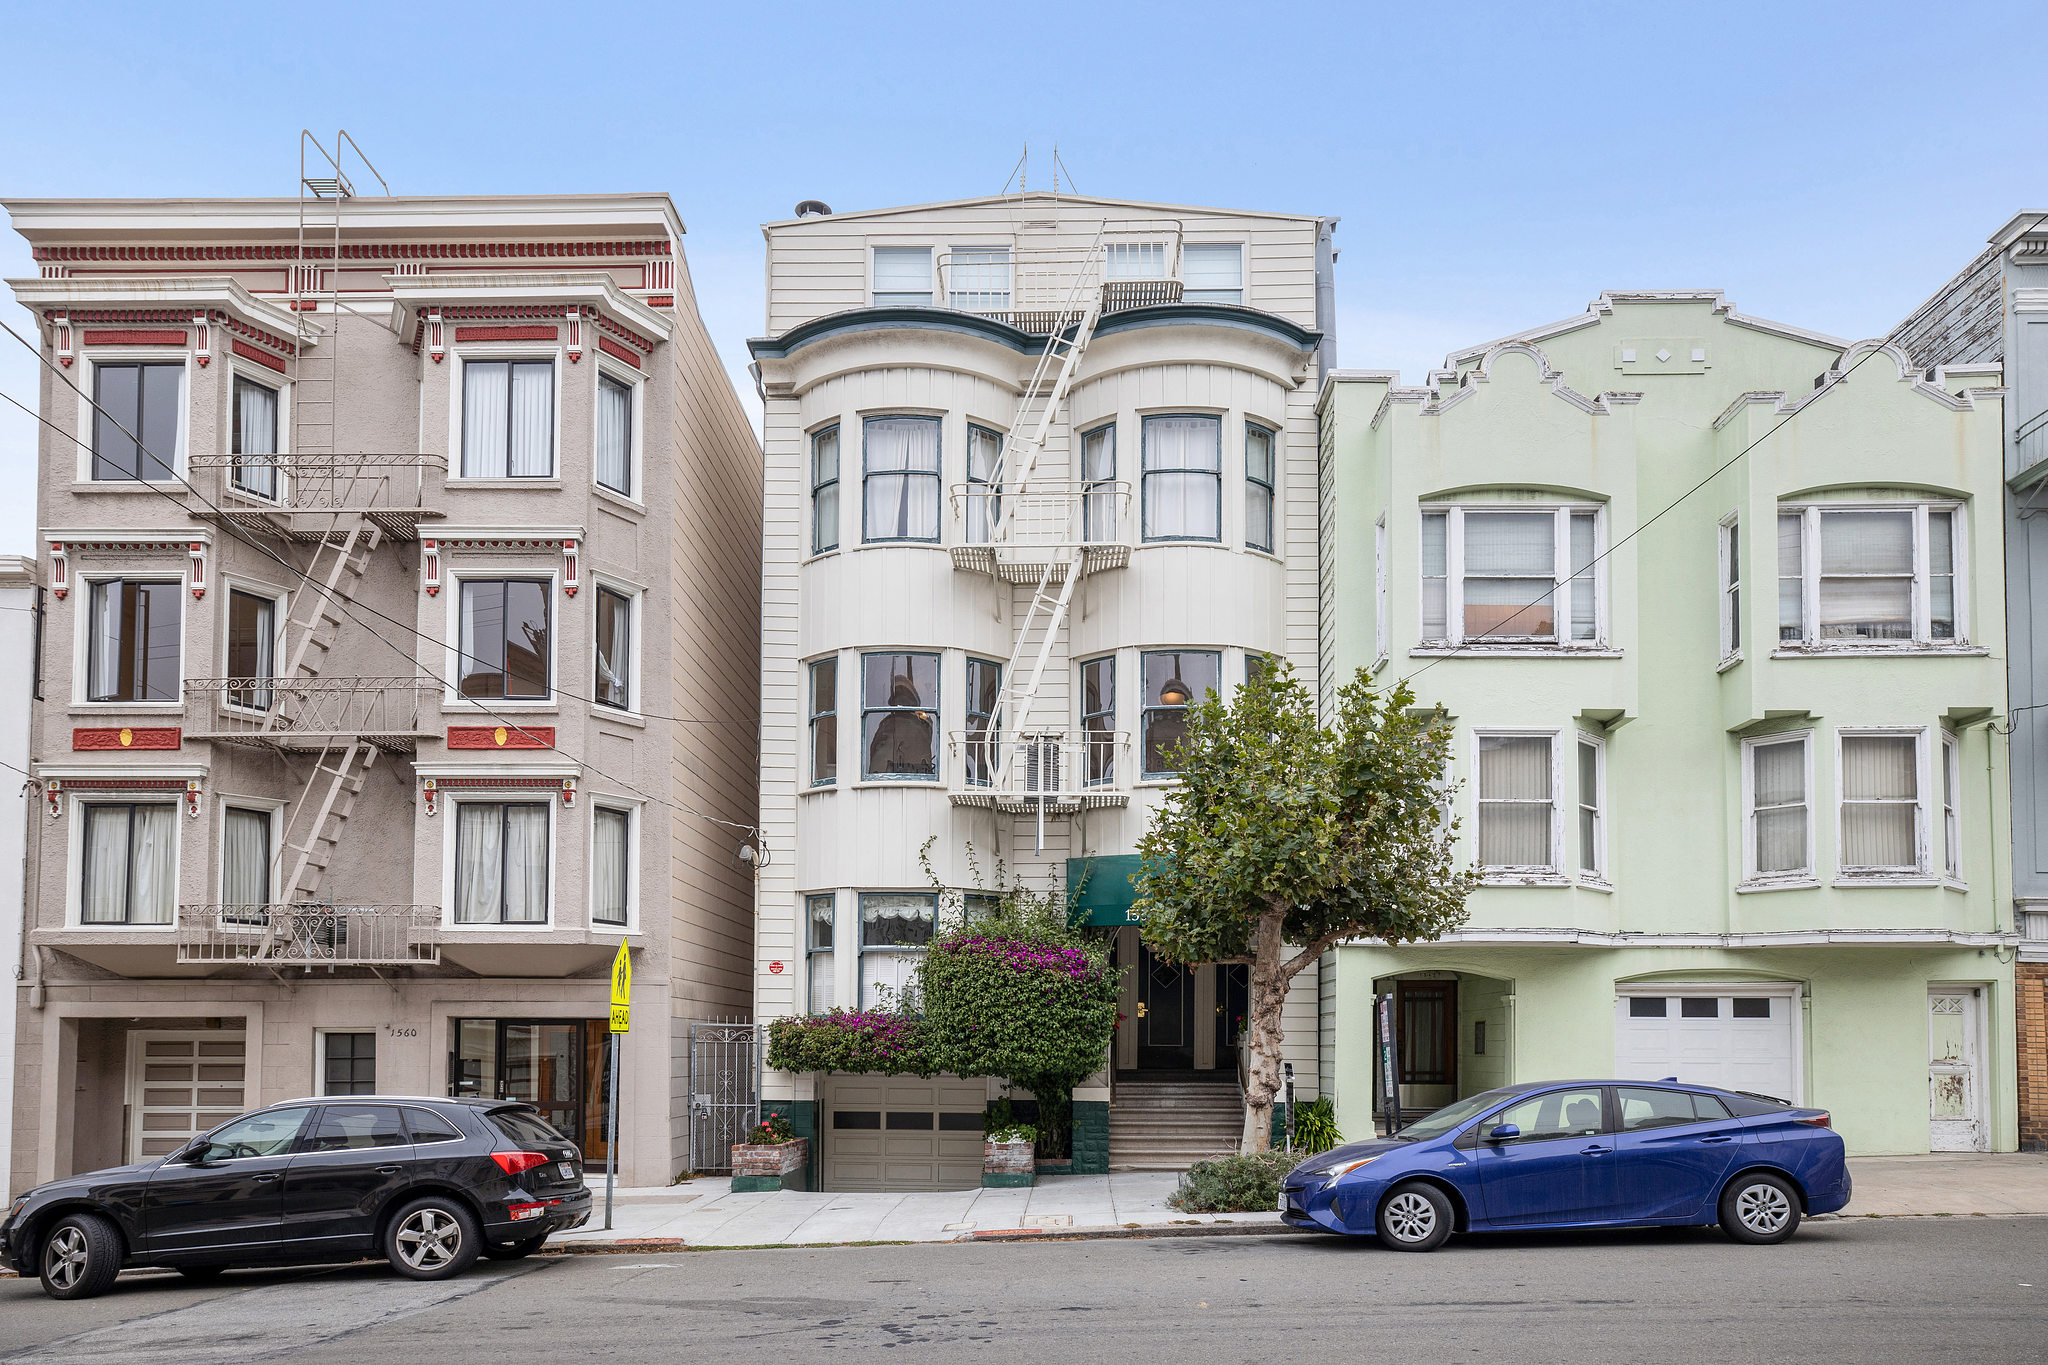 Feature photo for 1554 Green St #F, San Francisco